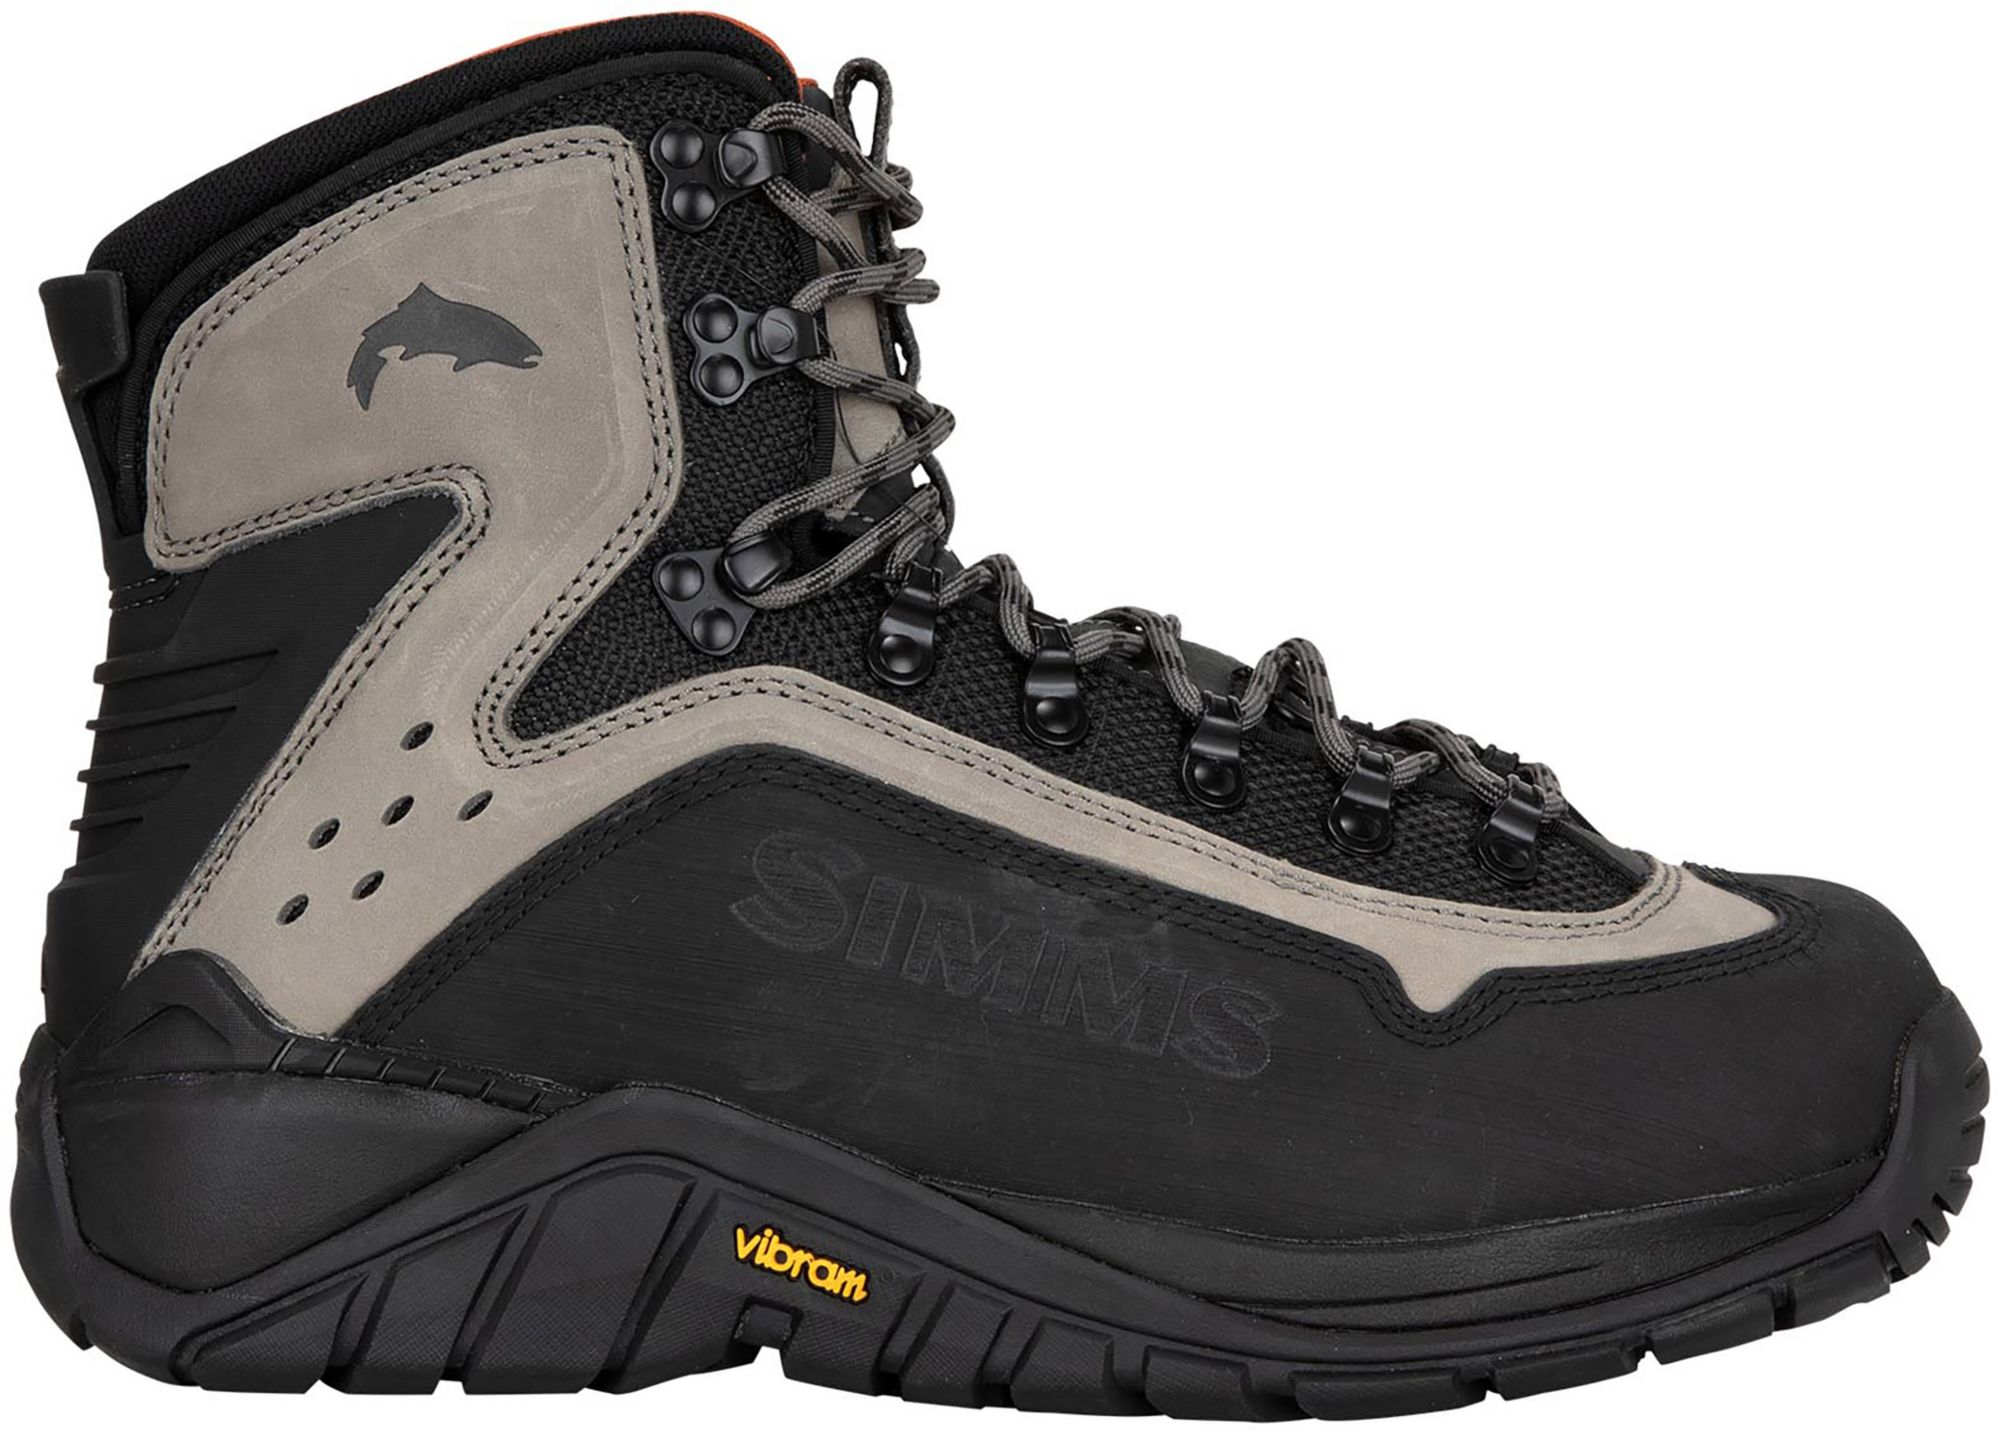 Photos - Fishing Shoes Simms G3 Guide Wading Boots, Men's, Size 9, Steel Grey 17SMSUG3GDBTSTLXXWA 